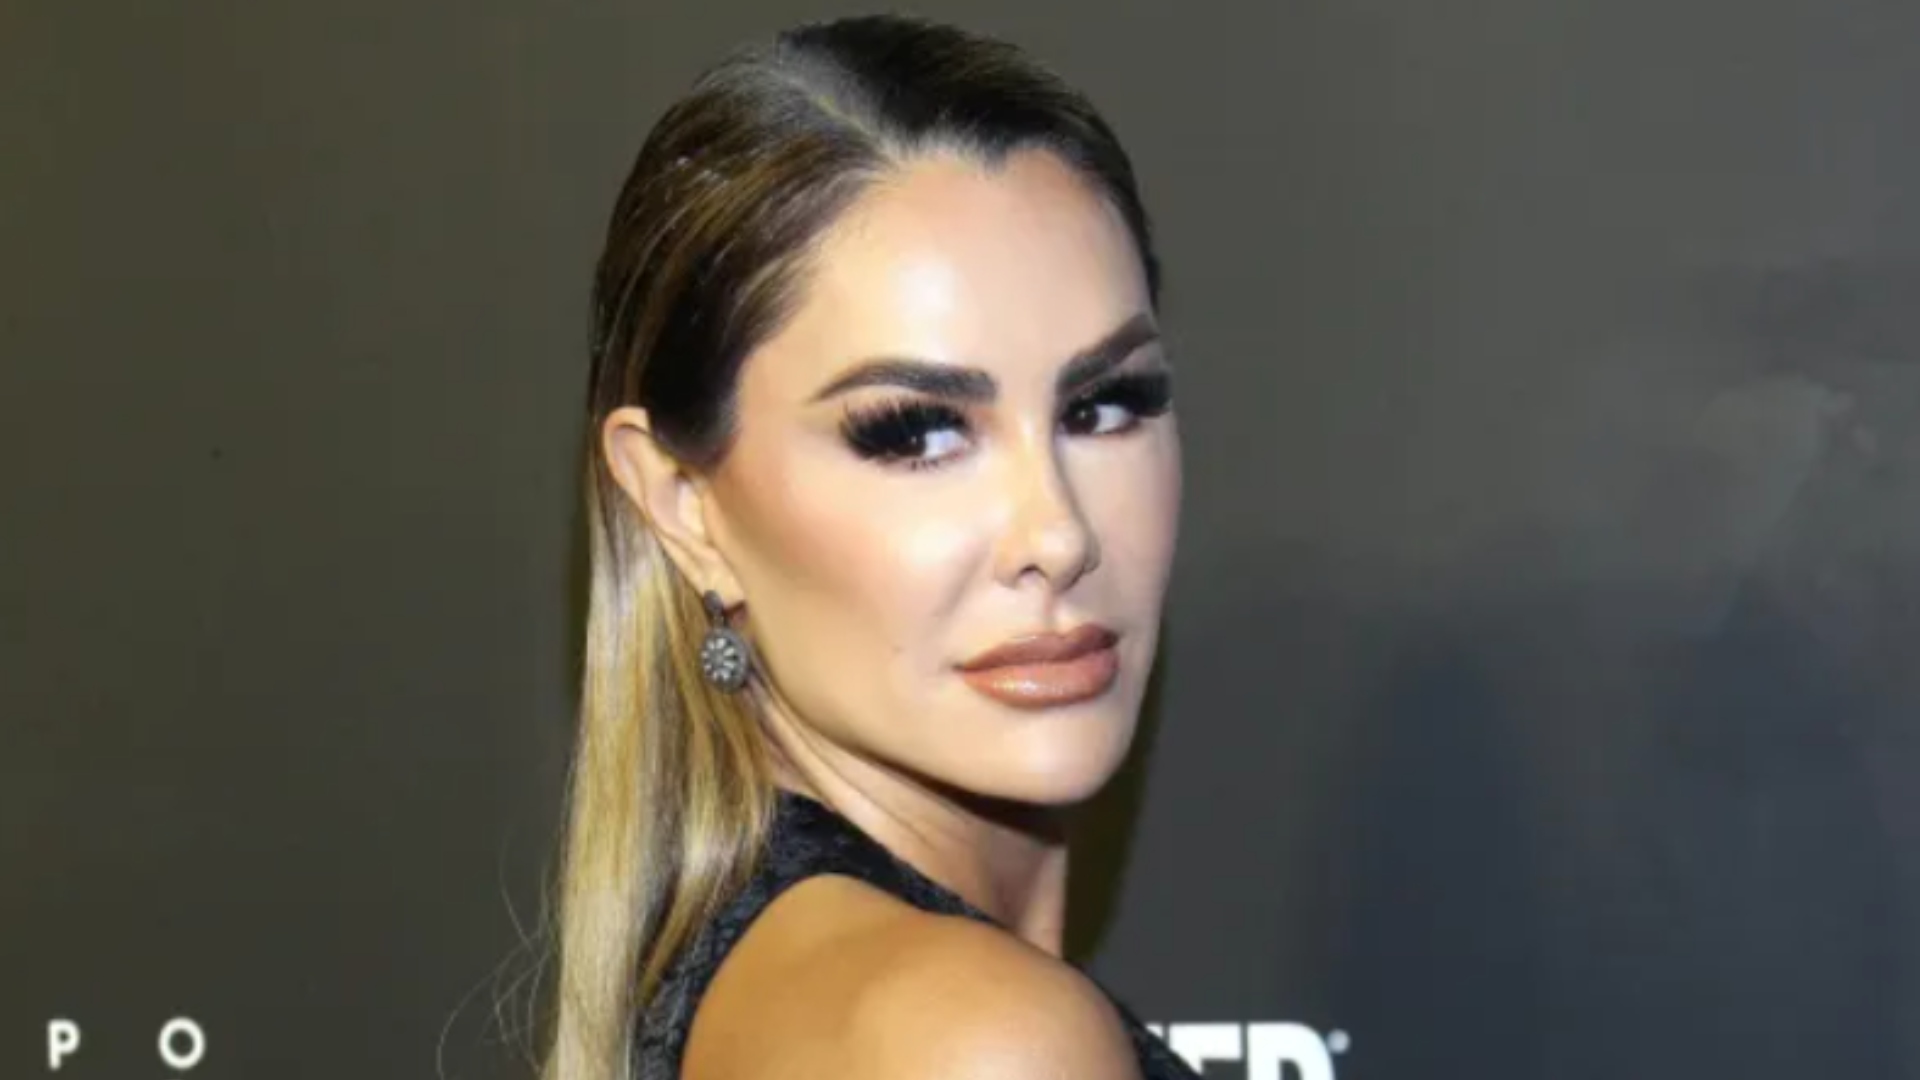 Is 'Alma Rey' back? Ninel Conde includes RBD songs on her 2023 tour ...